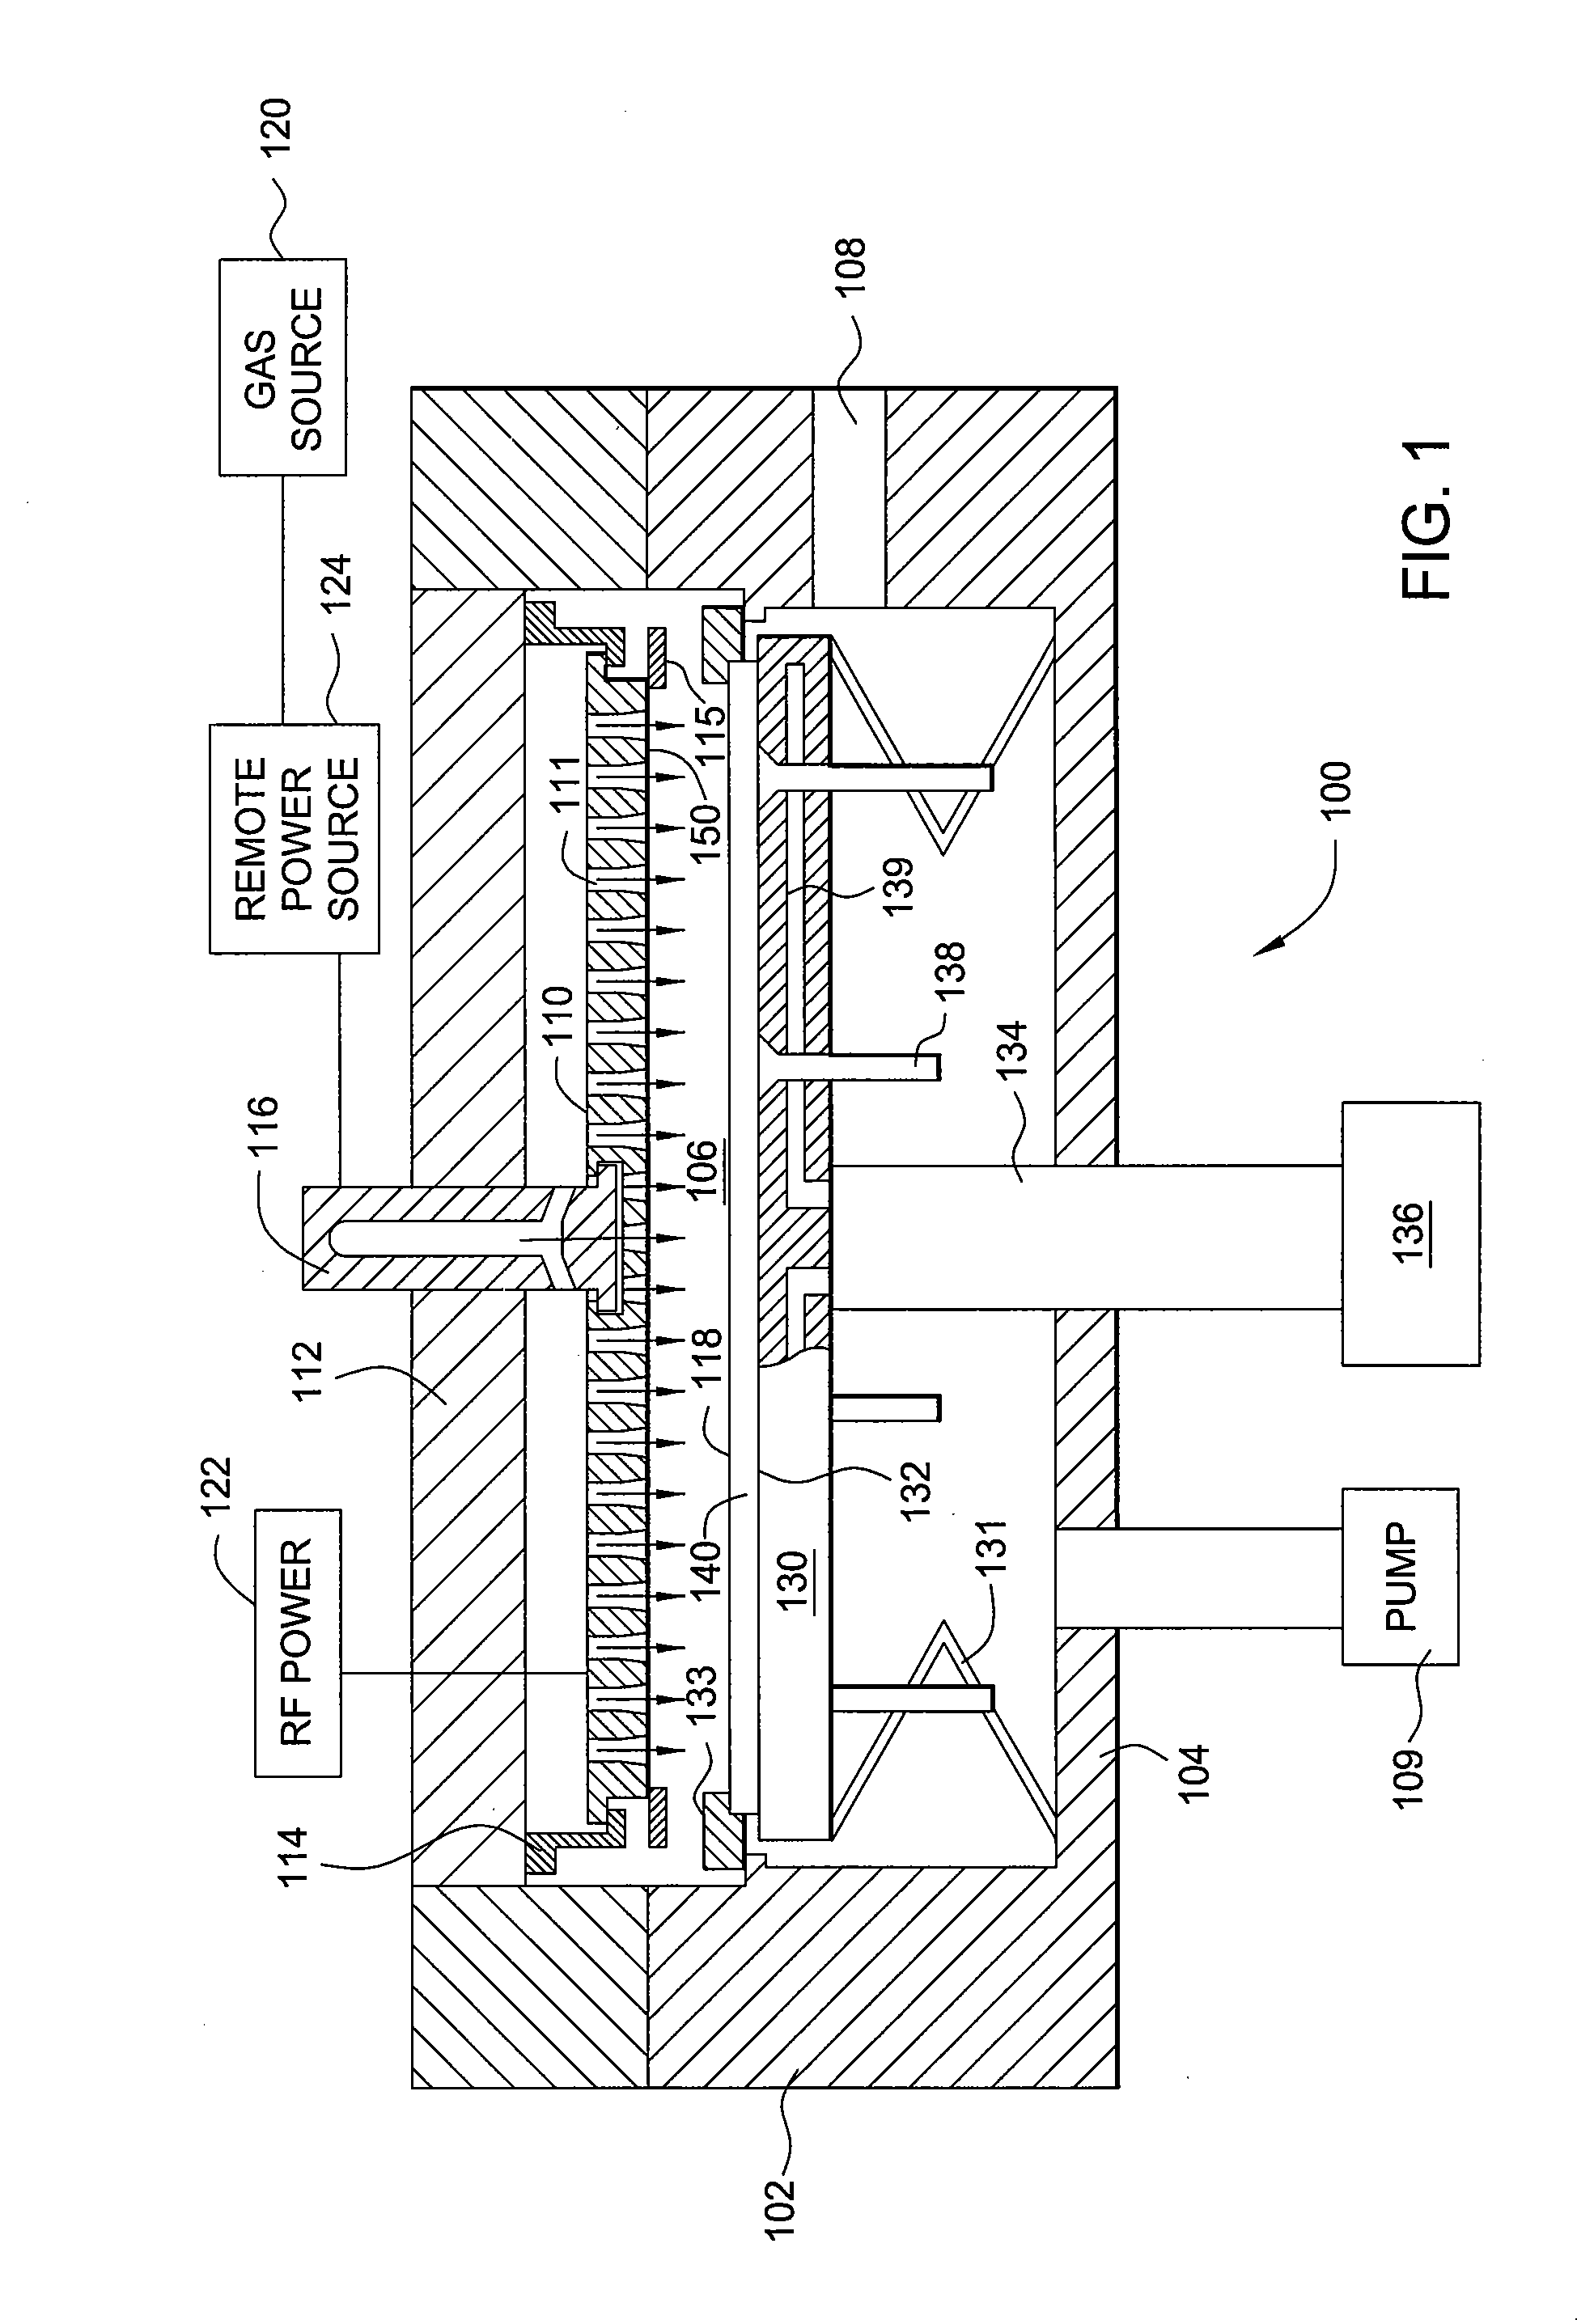 Apparatus for depositing a uniform silicon film and methods for manufacturing the same